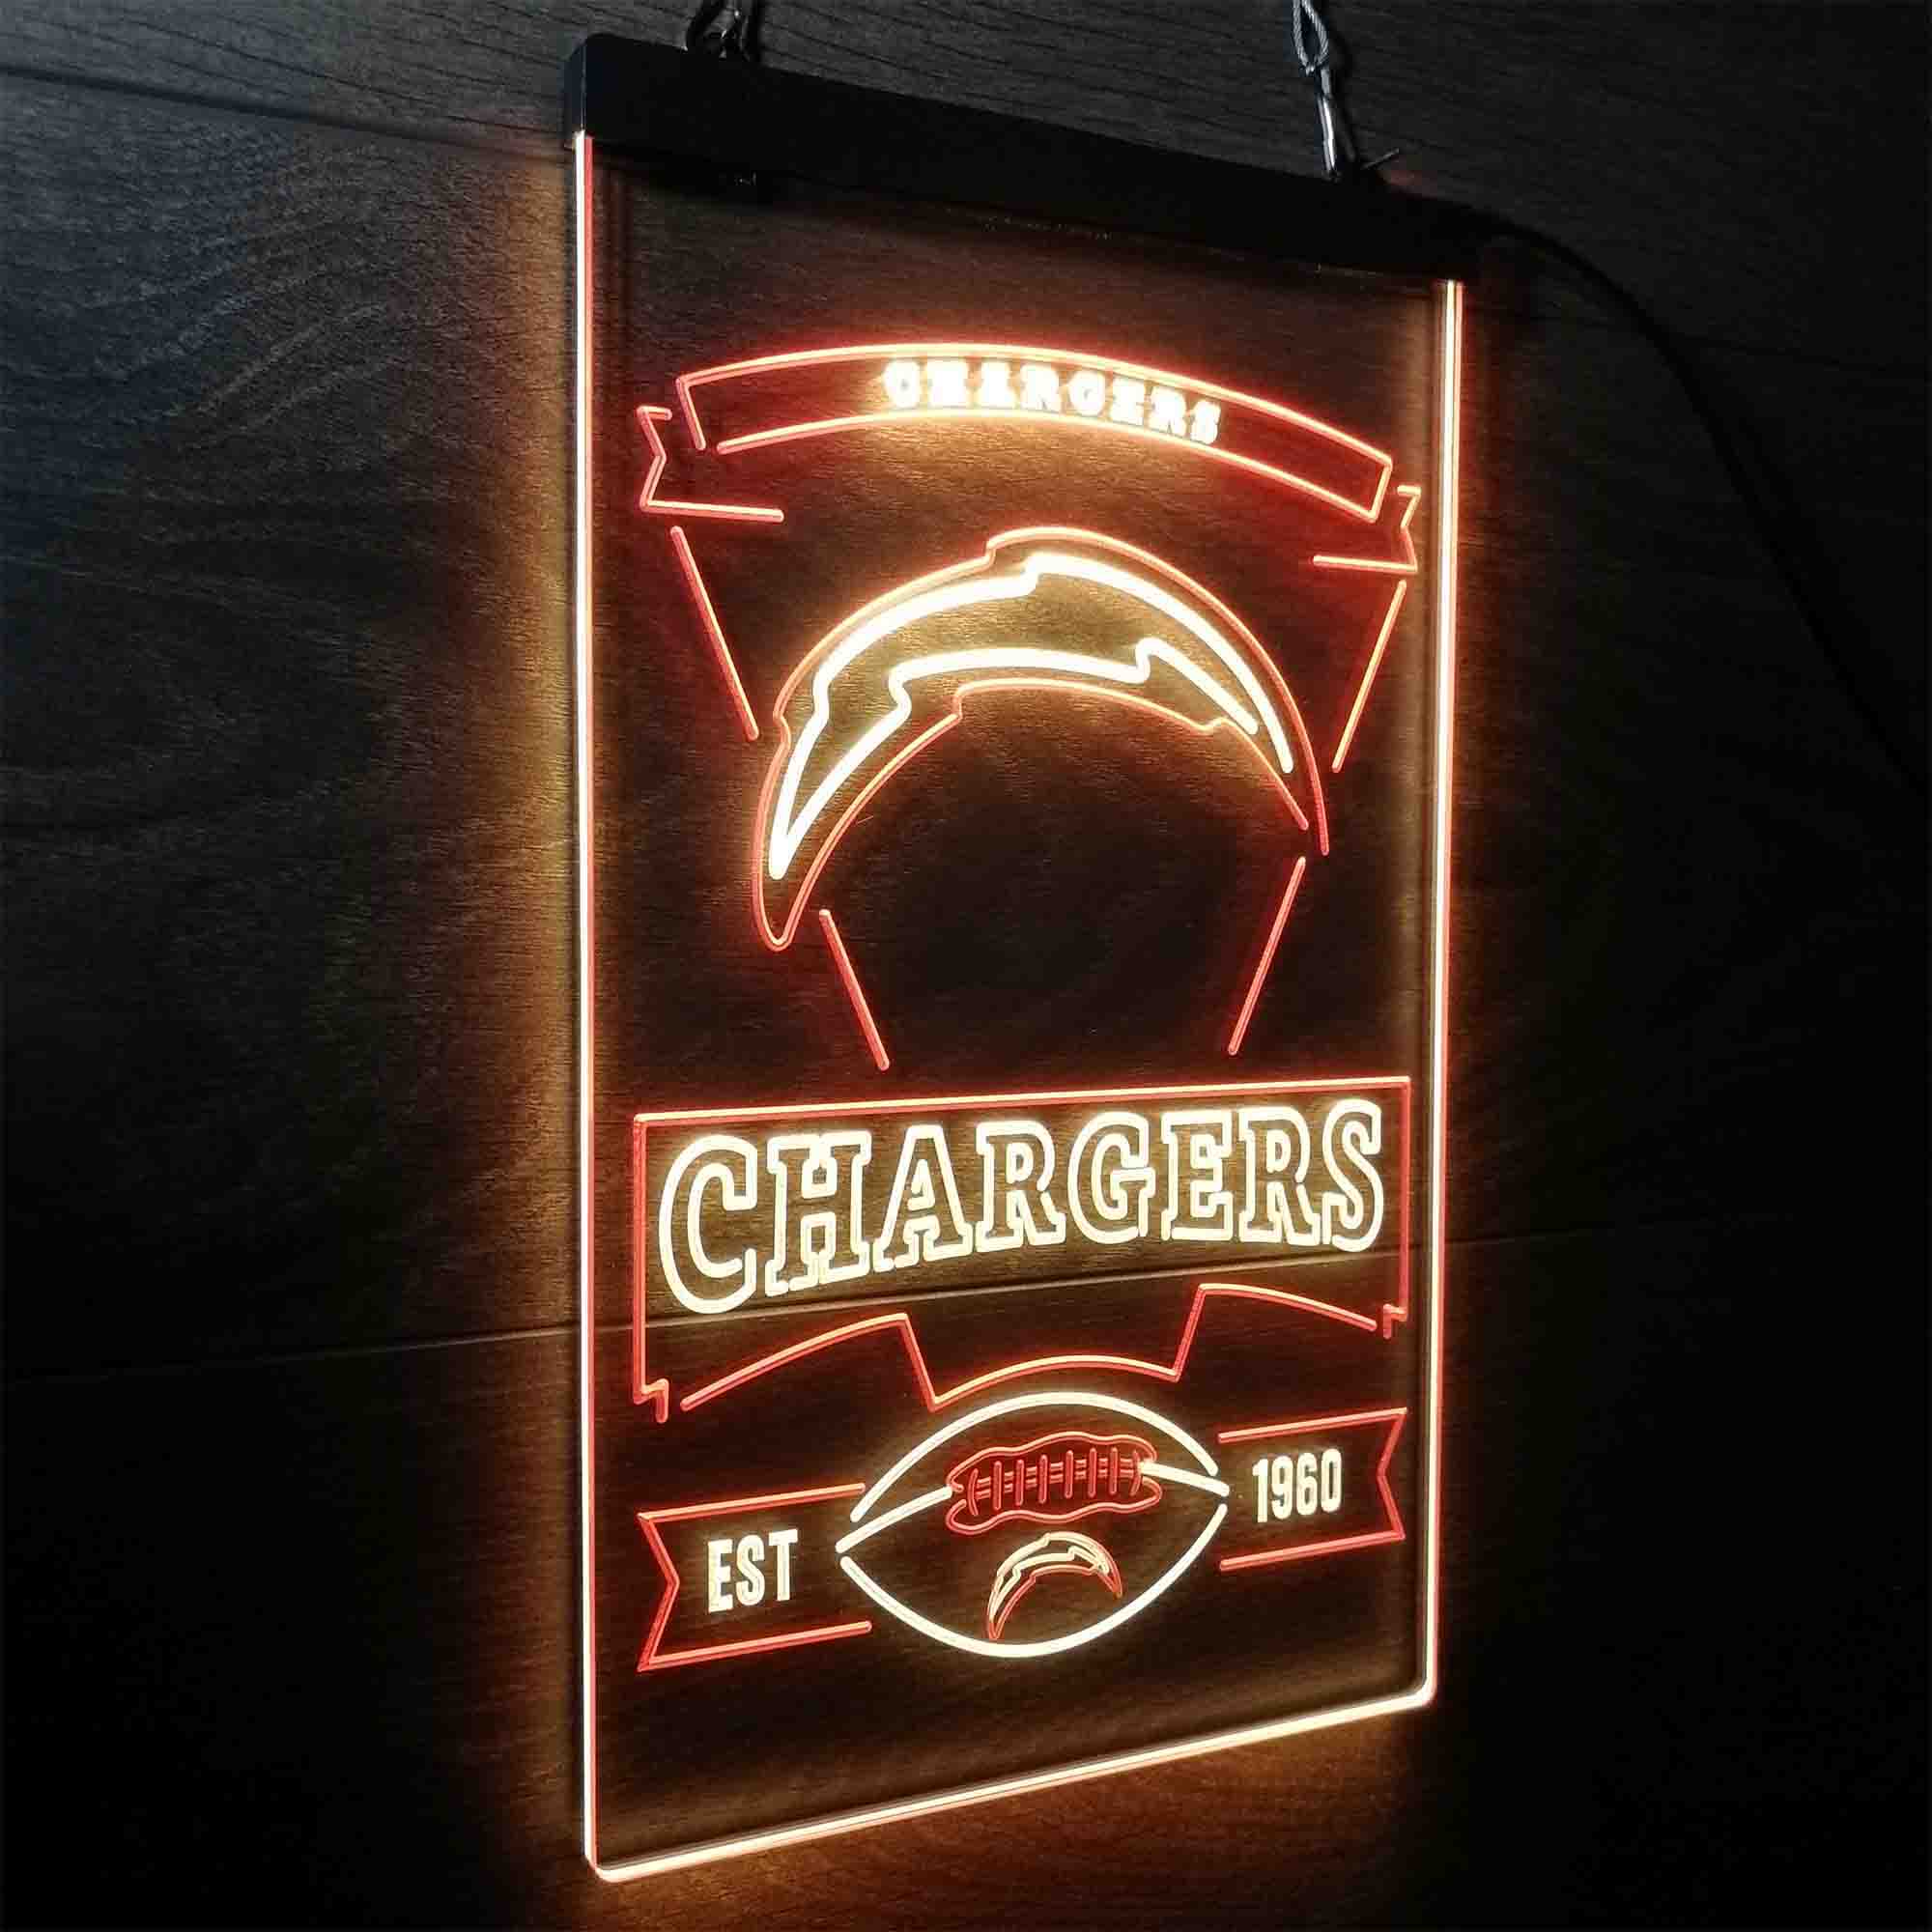 Los Angeles Chargers Est. 1960 LED Neon Sign